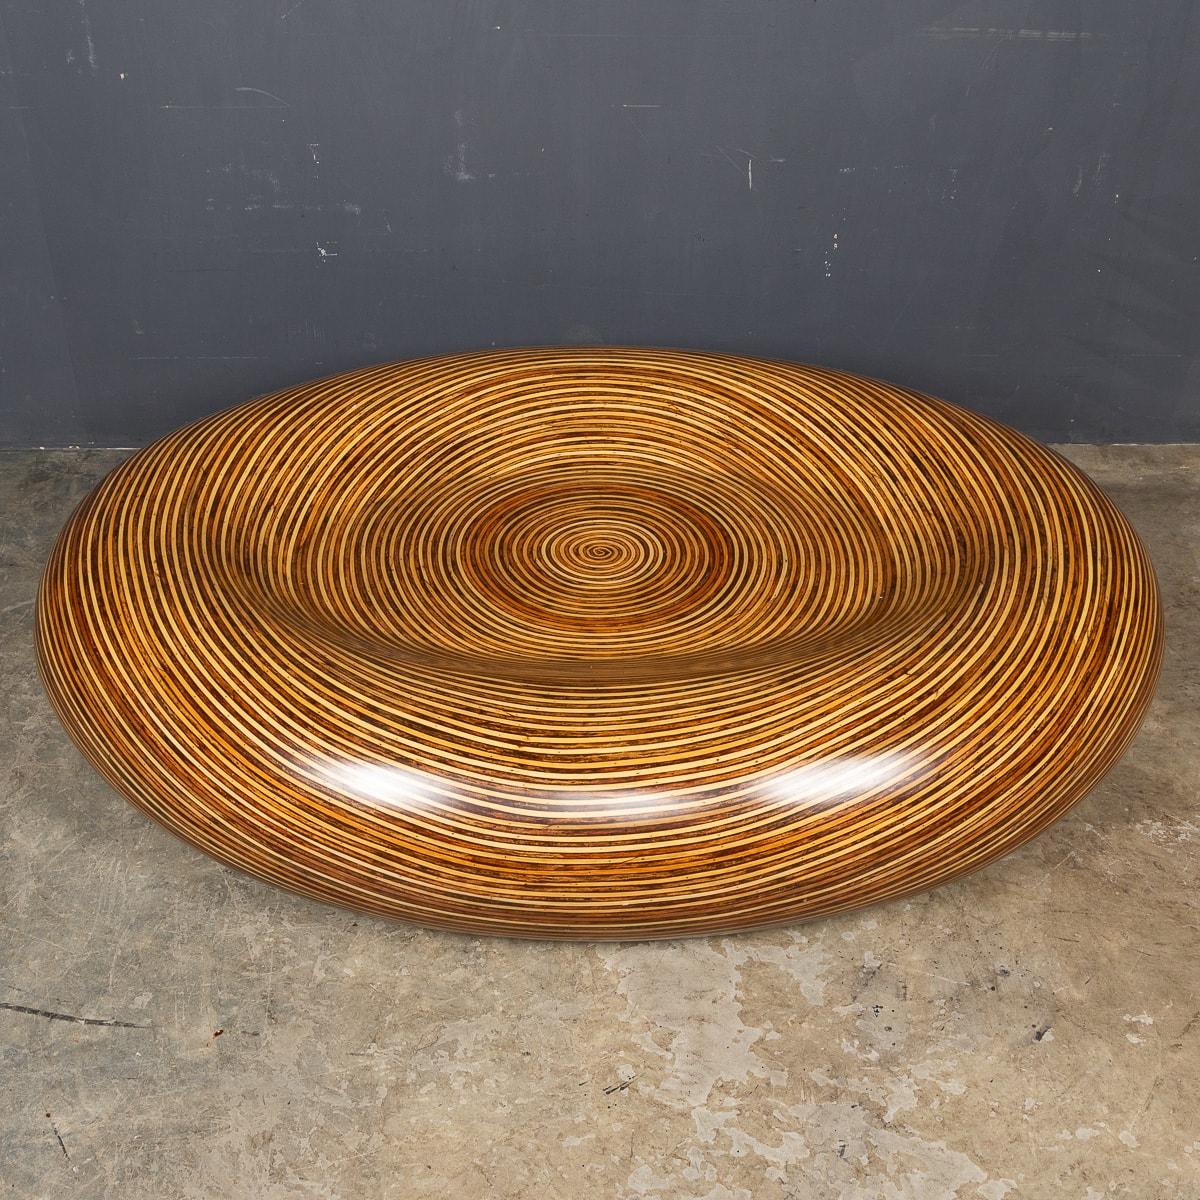 A superb 20thC fibreglass table seamlessly moulded into a captivating round form, with a layered wood-effect pattern that spans its entire surface. This generously sized table boasts smooth edges, enveloping a flat central area—ideal for a serving